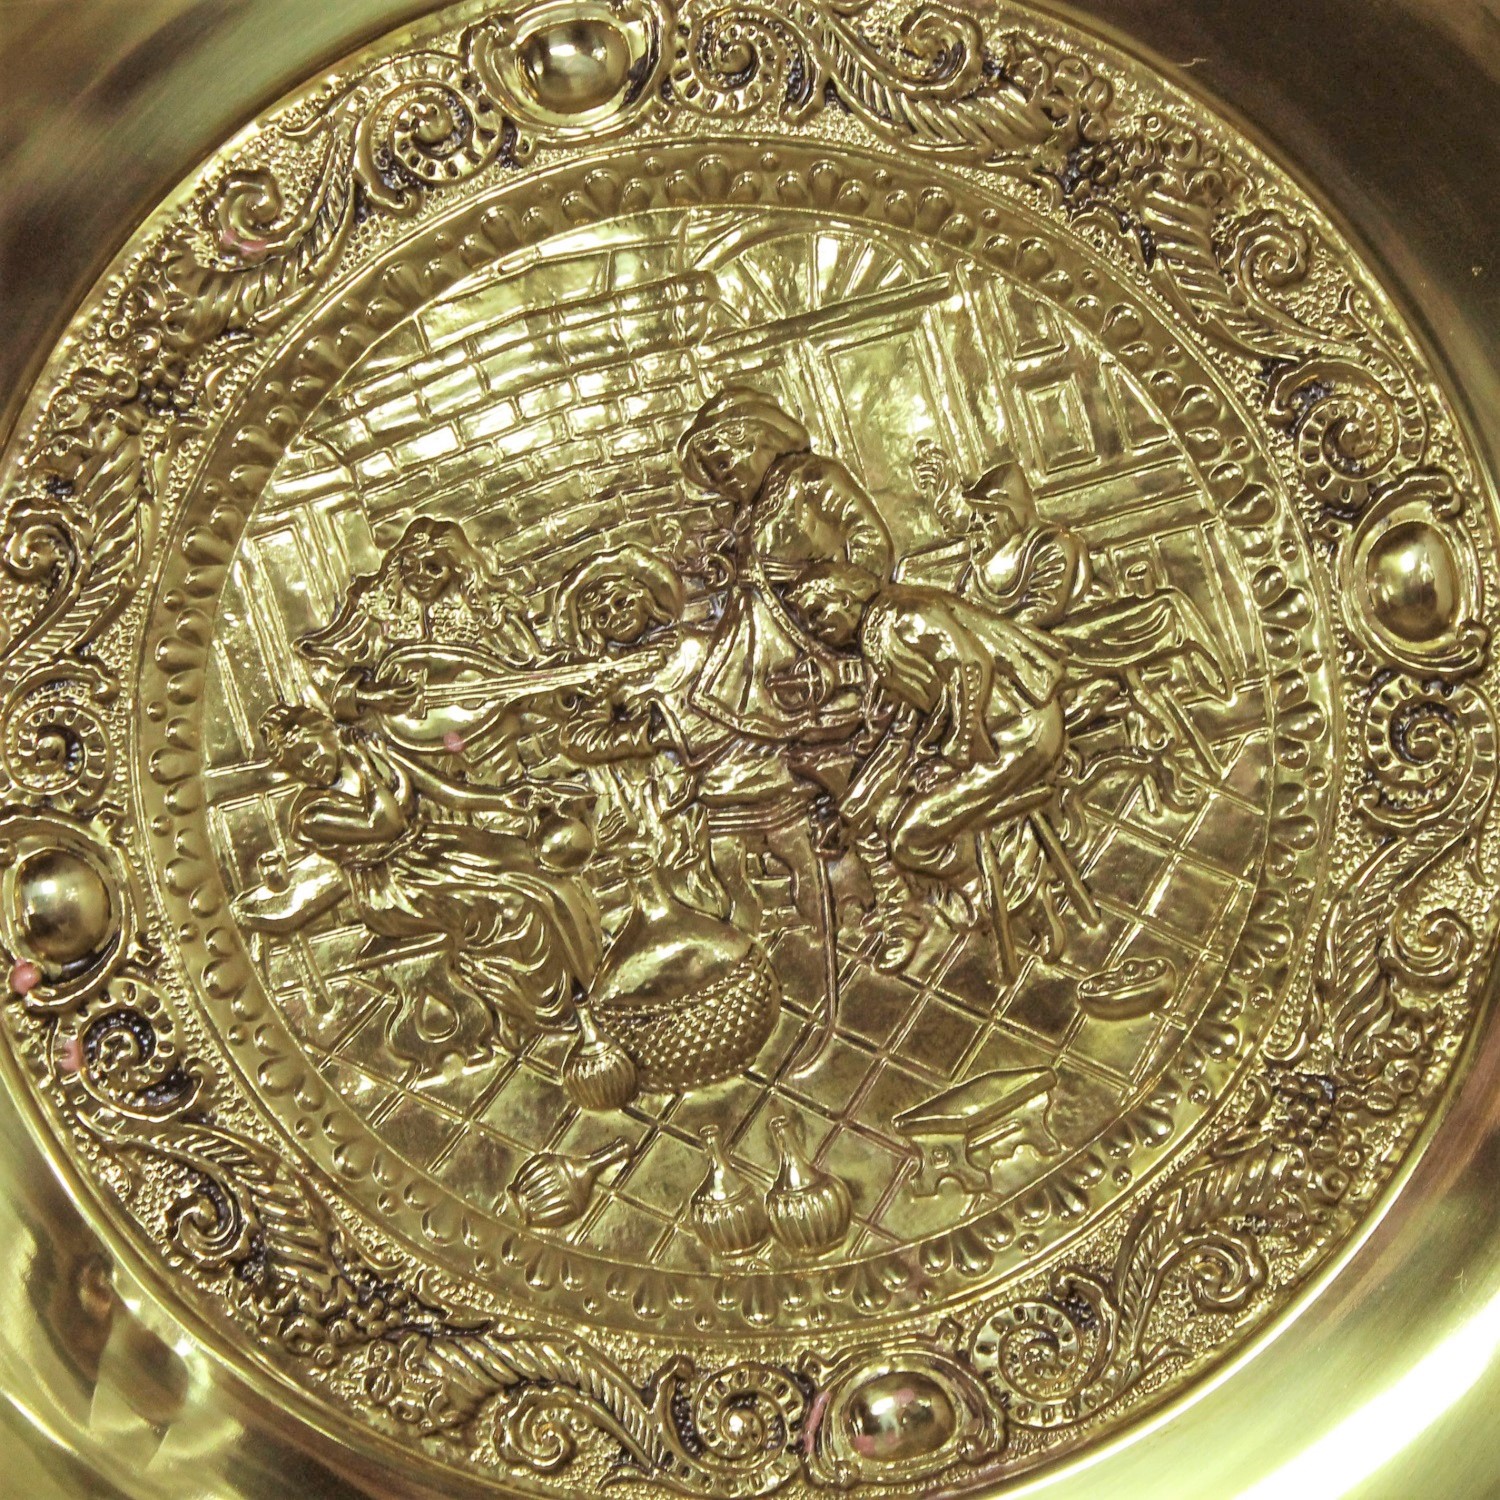 Monumental Brassware Decorative Embossed English Wall Plates by Peerage